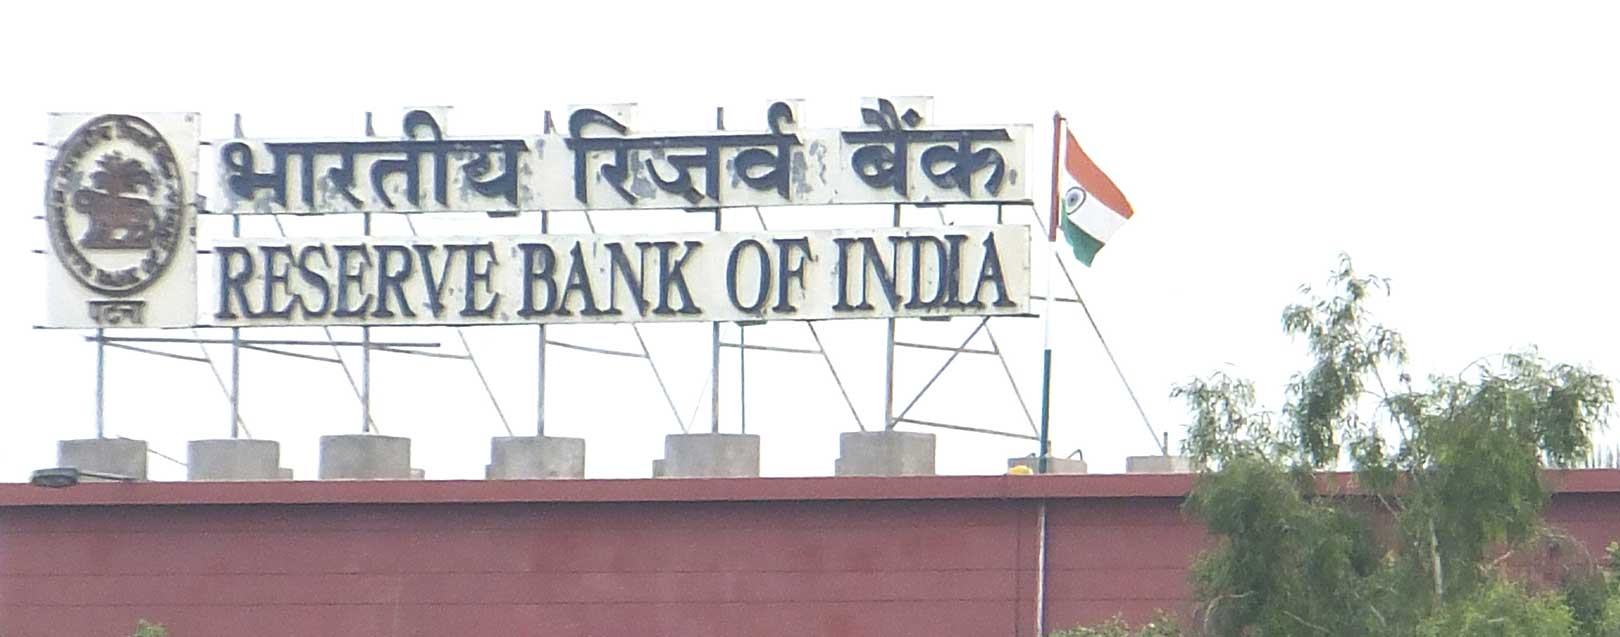 RBI’s prior approval required to open BO in India